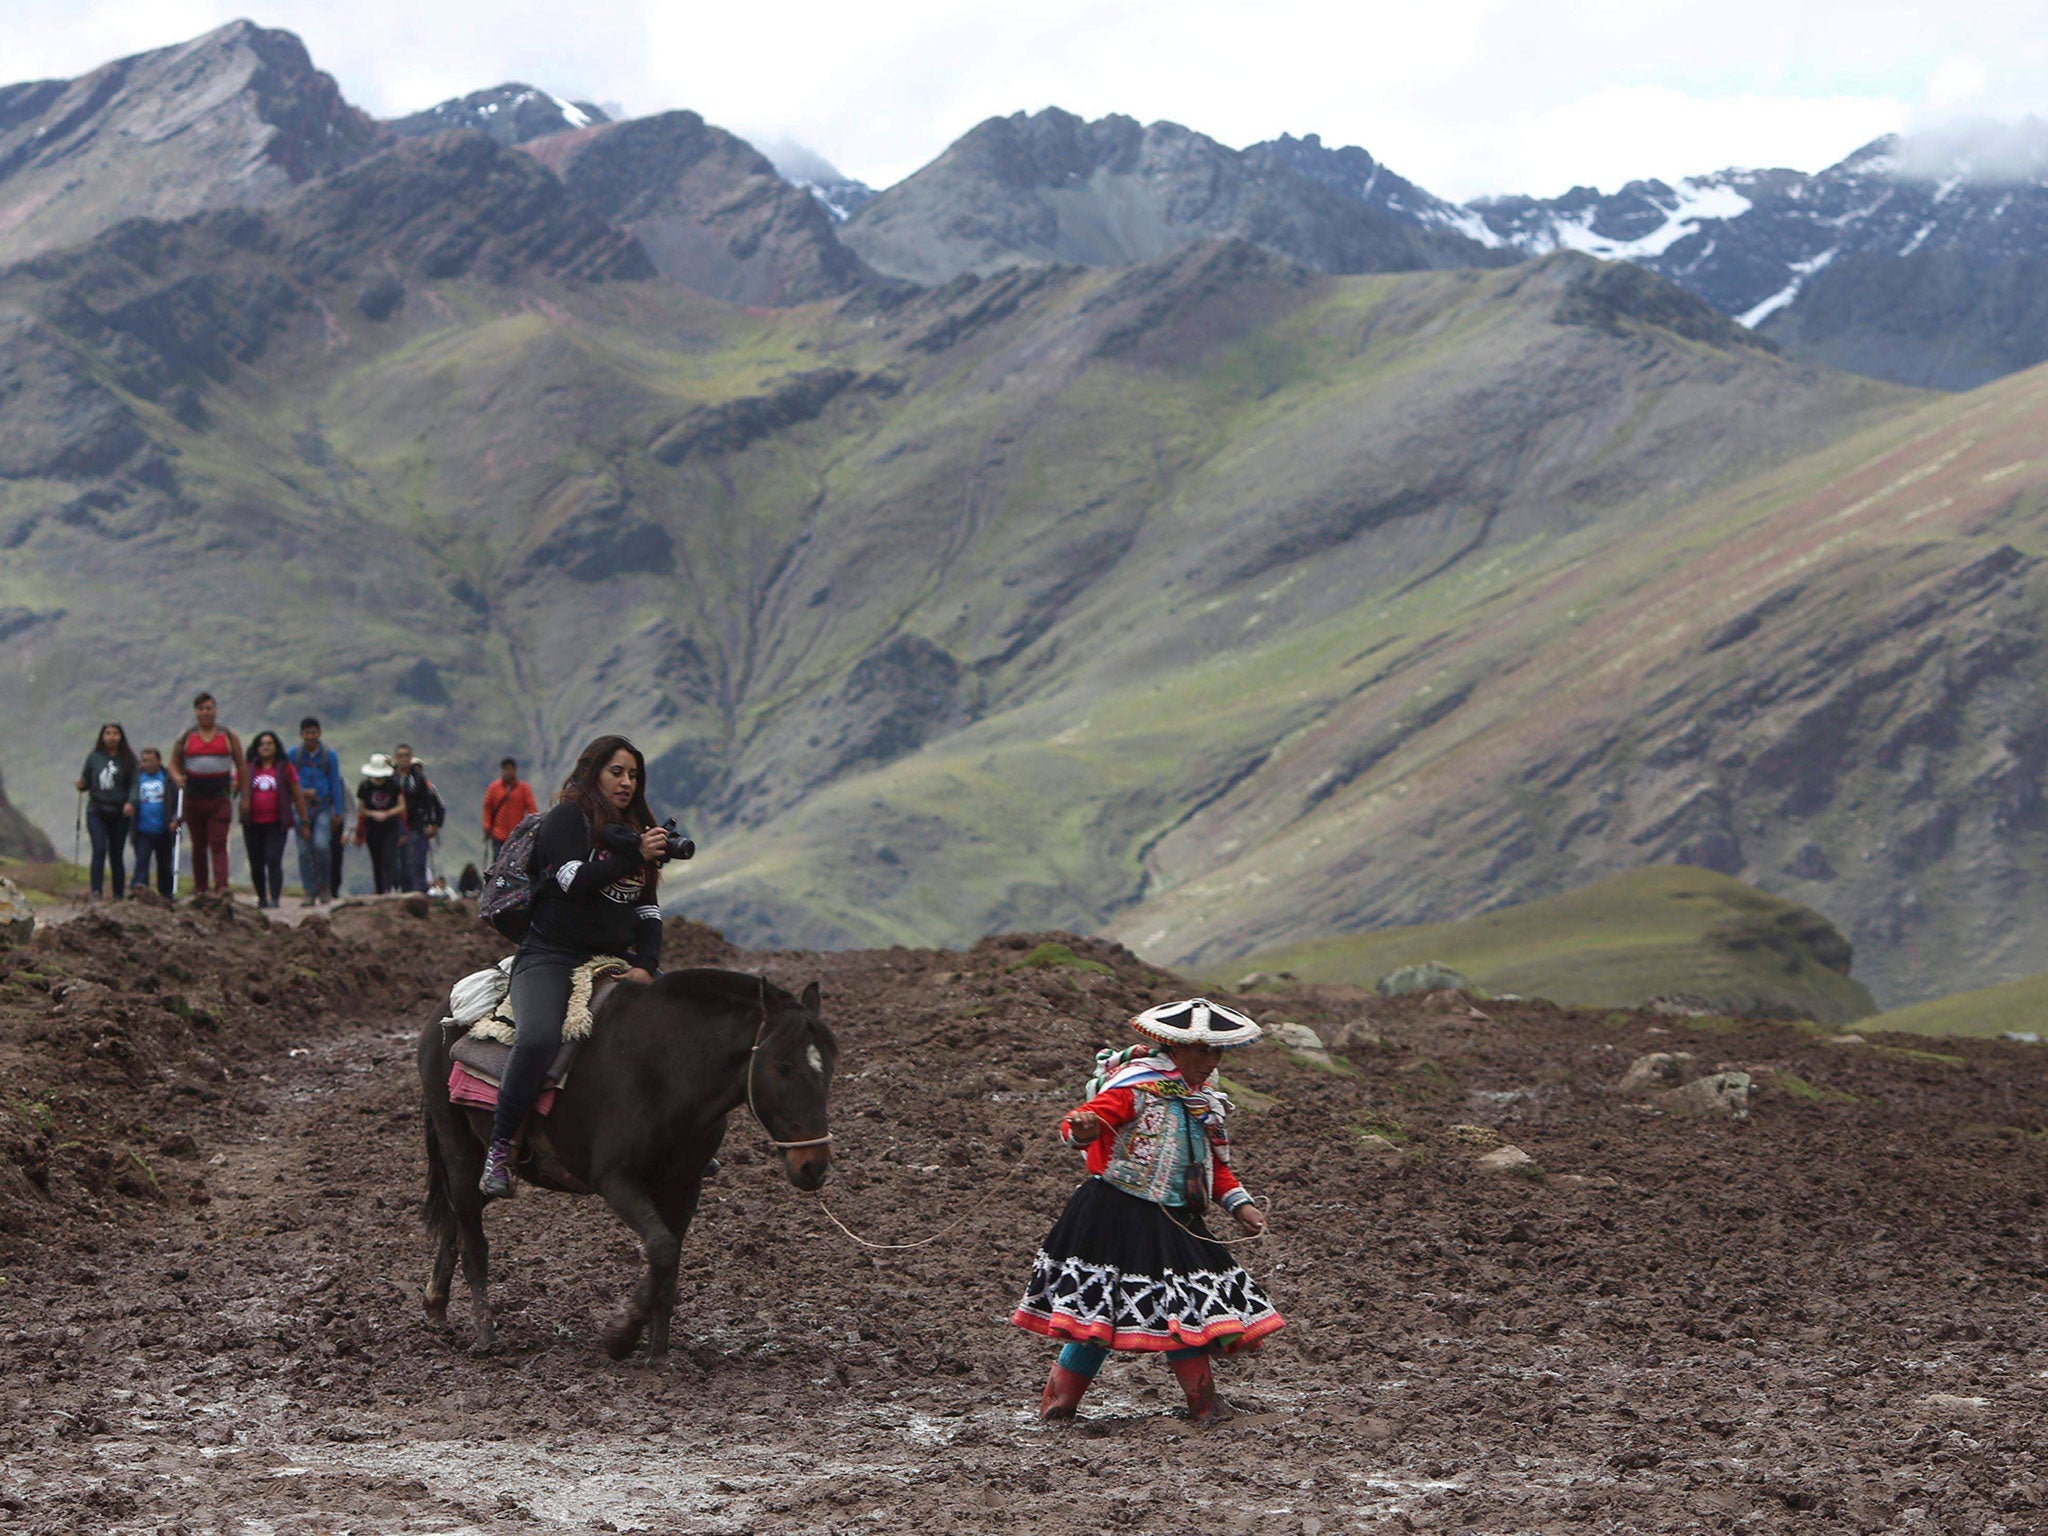 A local woman guides a tourist up to the mountain peak on horseback